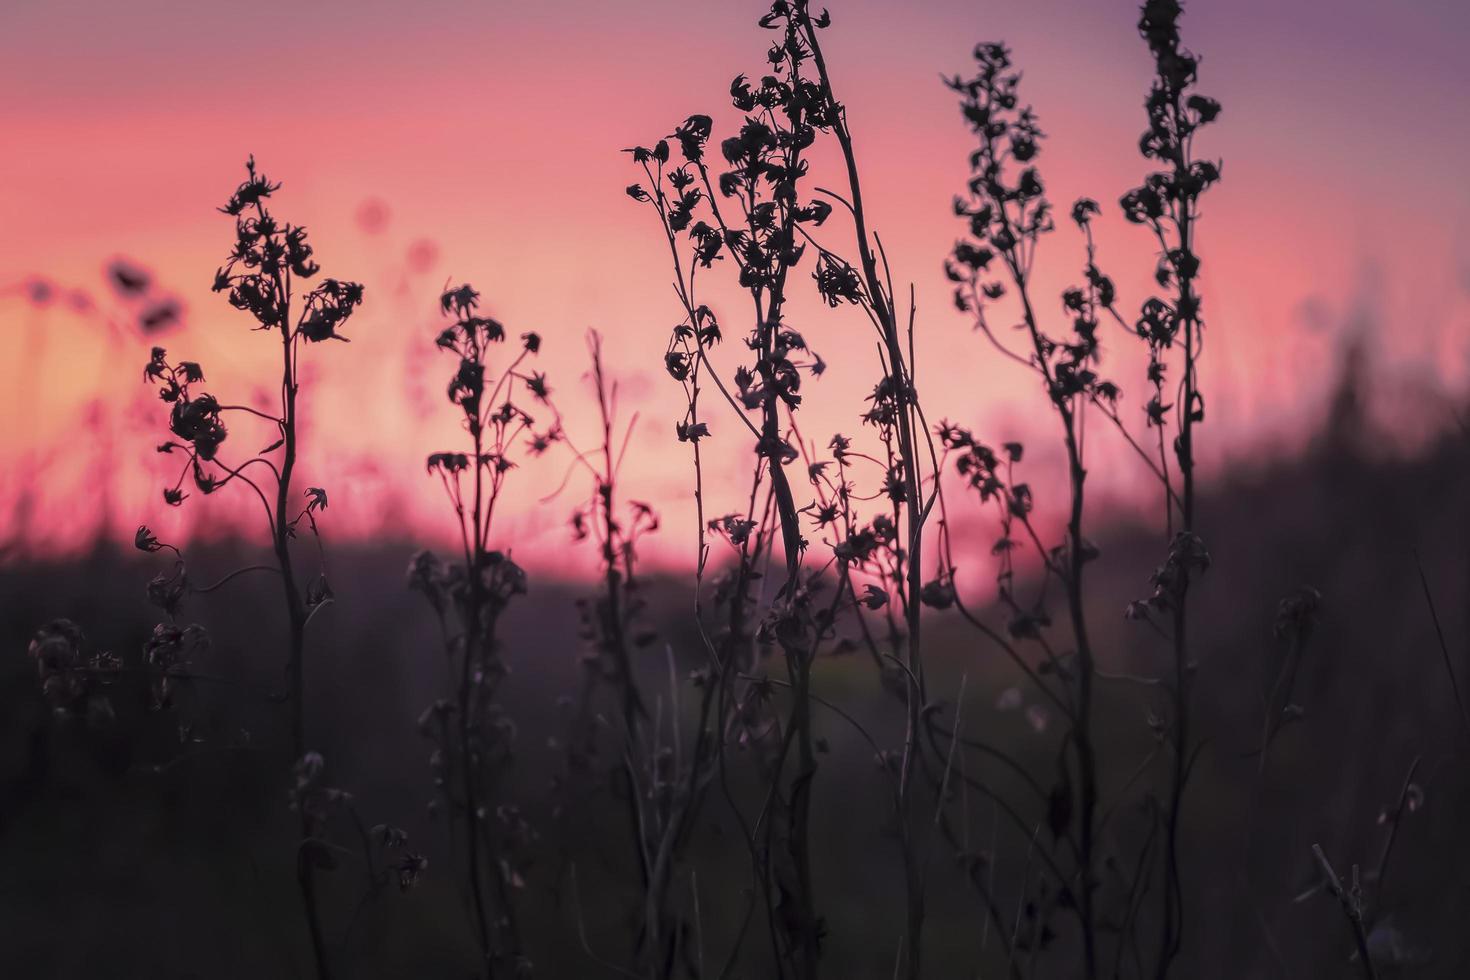 Flower silhouettes at sunset photo